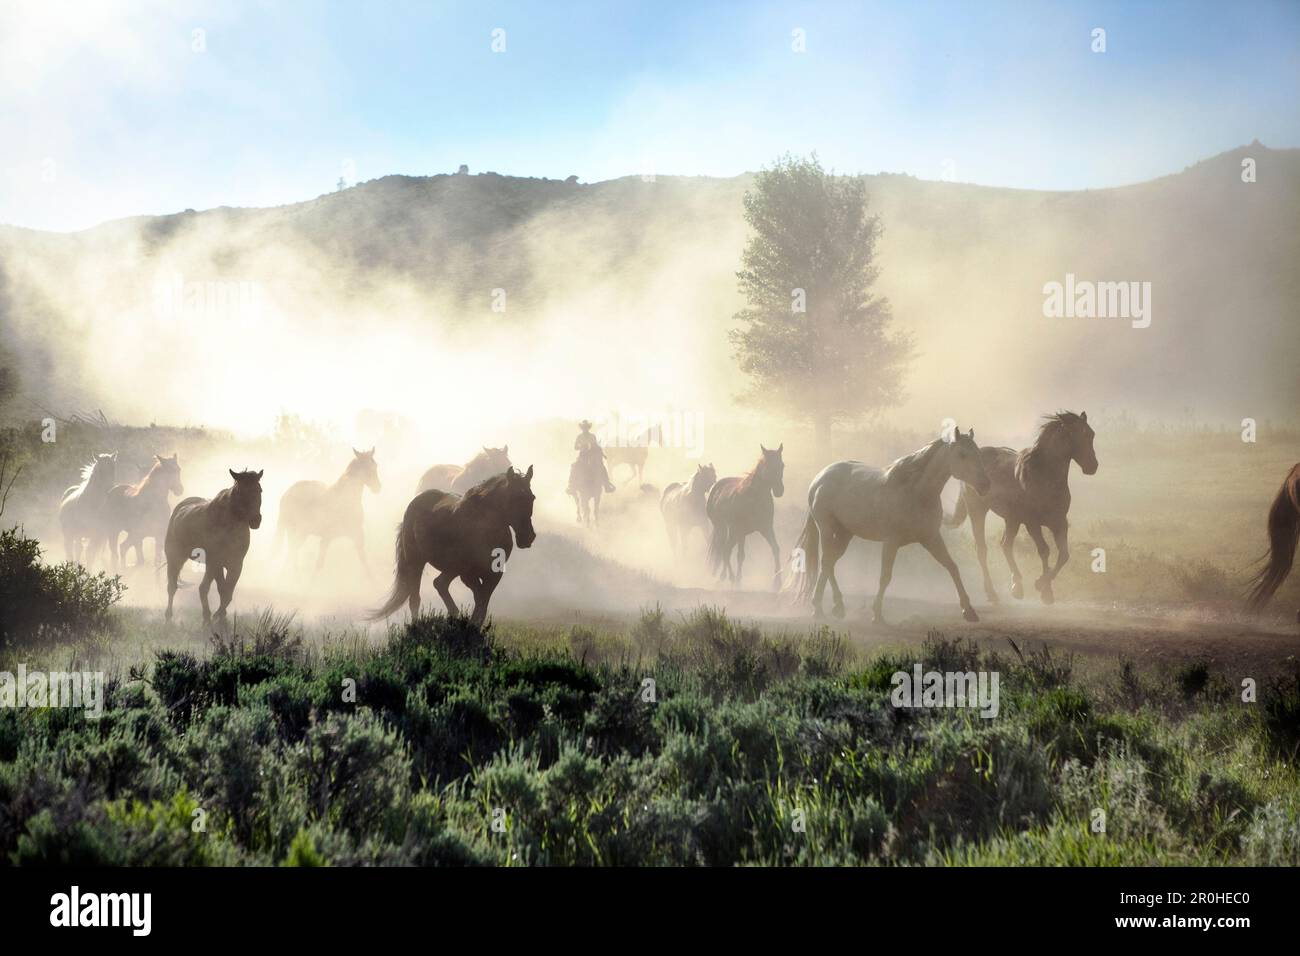 USA, Wyoming, Encampment, Wranglers leading horses to the barn in the early morning Stock Photo